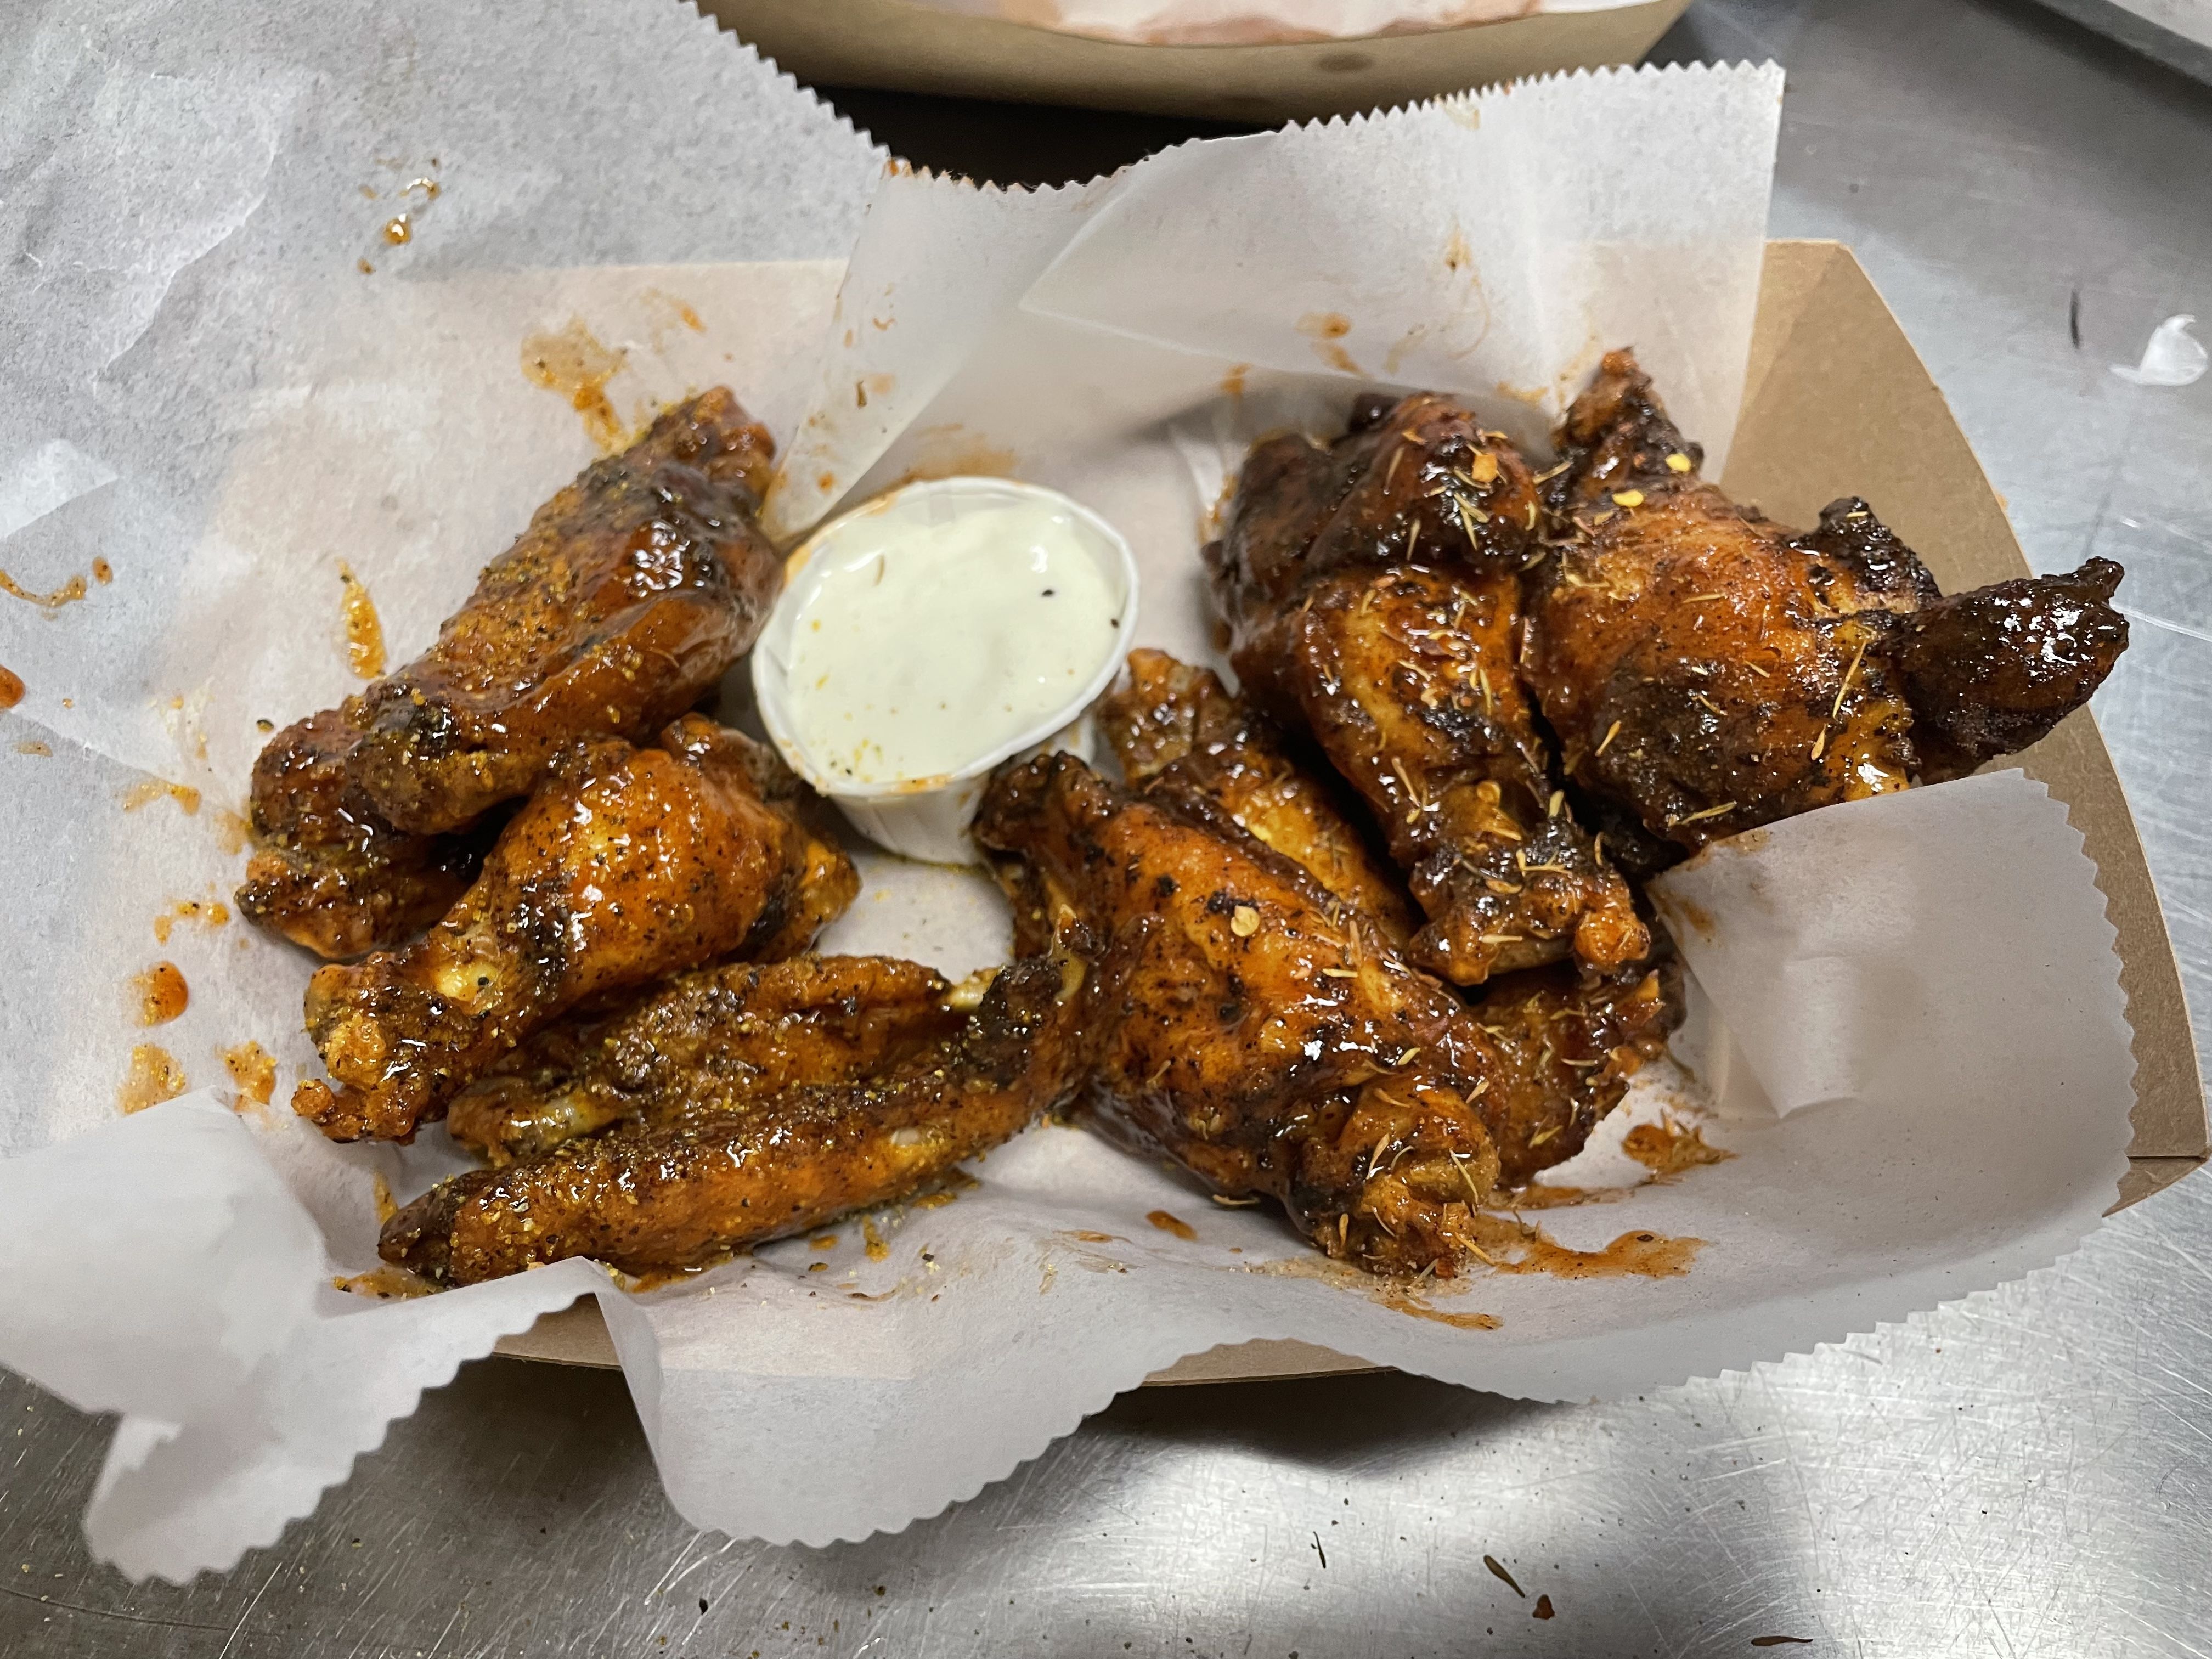 A photo of a basket of smoked wings and ranch or blue cheese